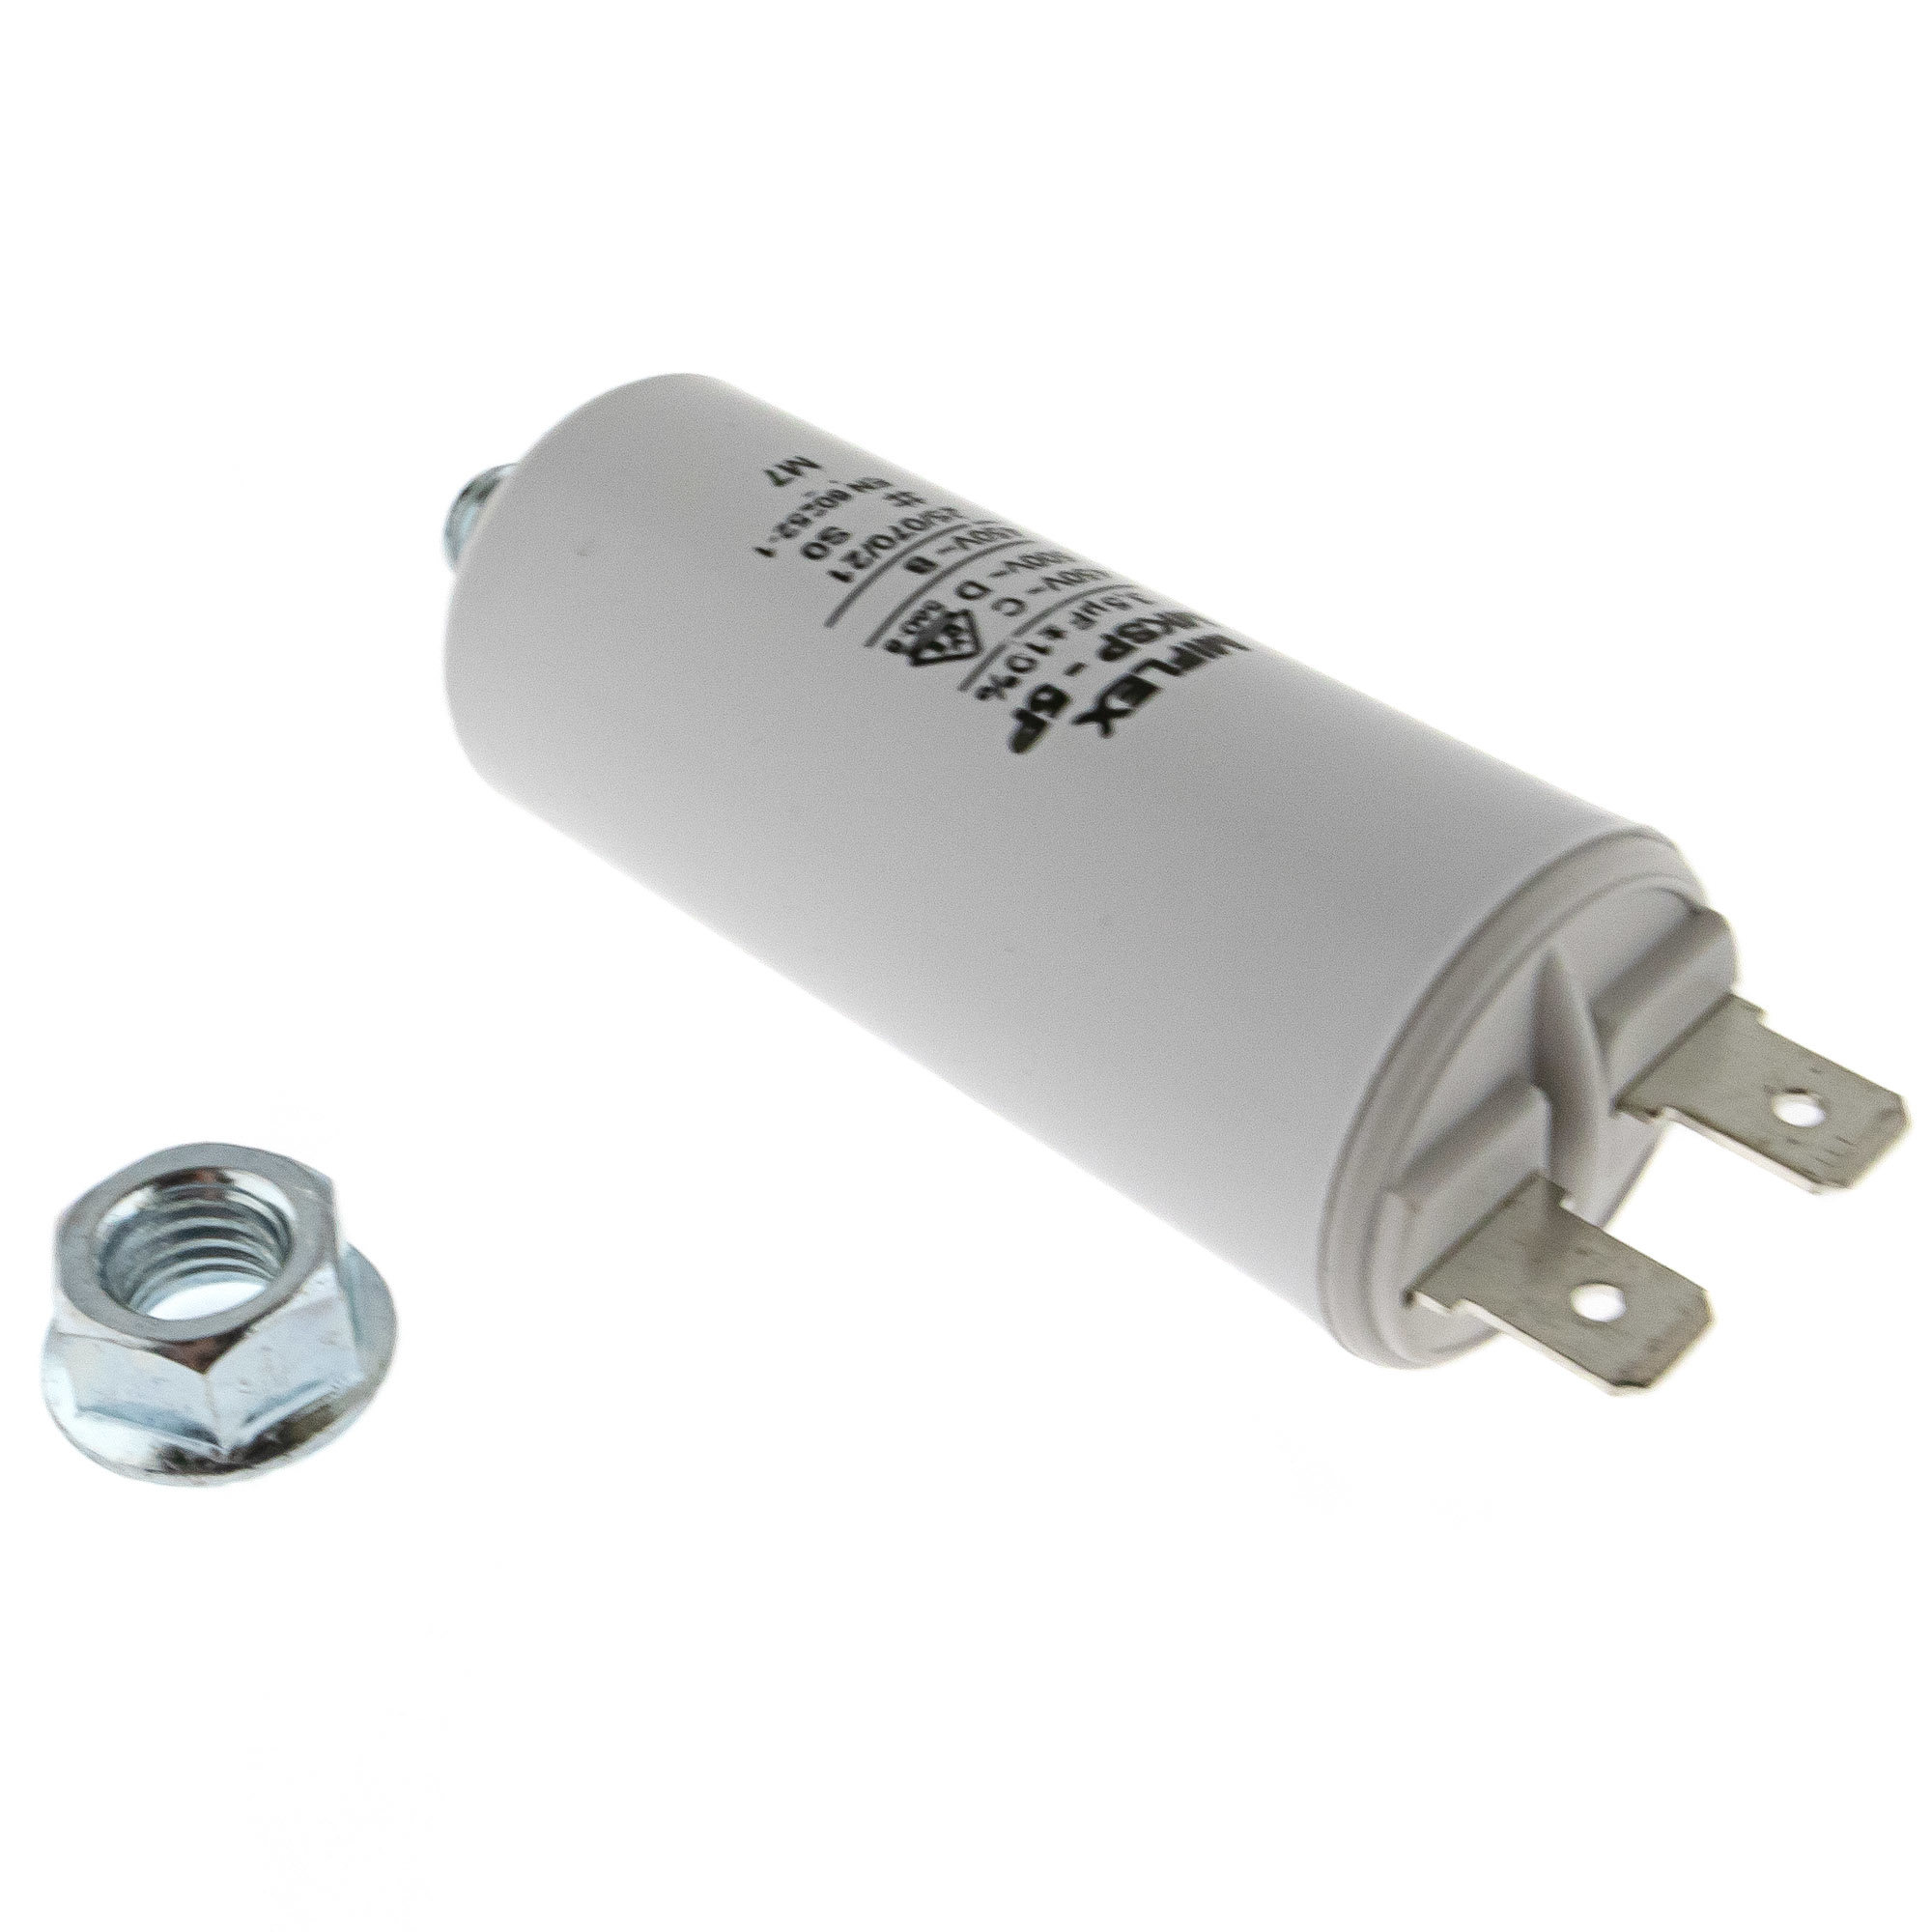 Motor Capacitor 3,5uF-450V, 25x58mm, flat connection